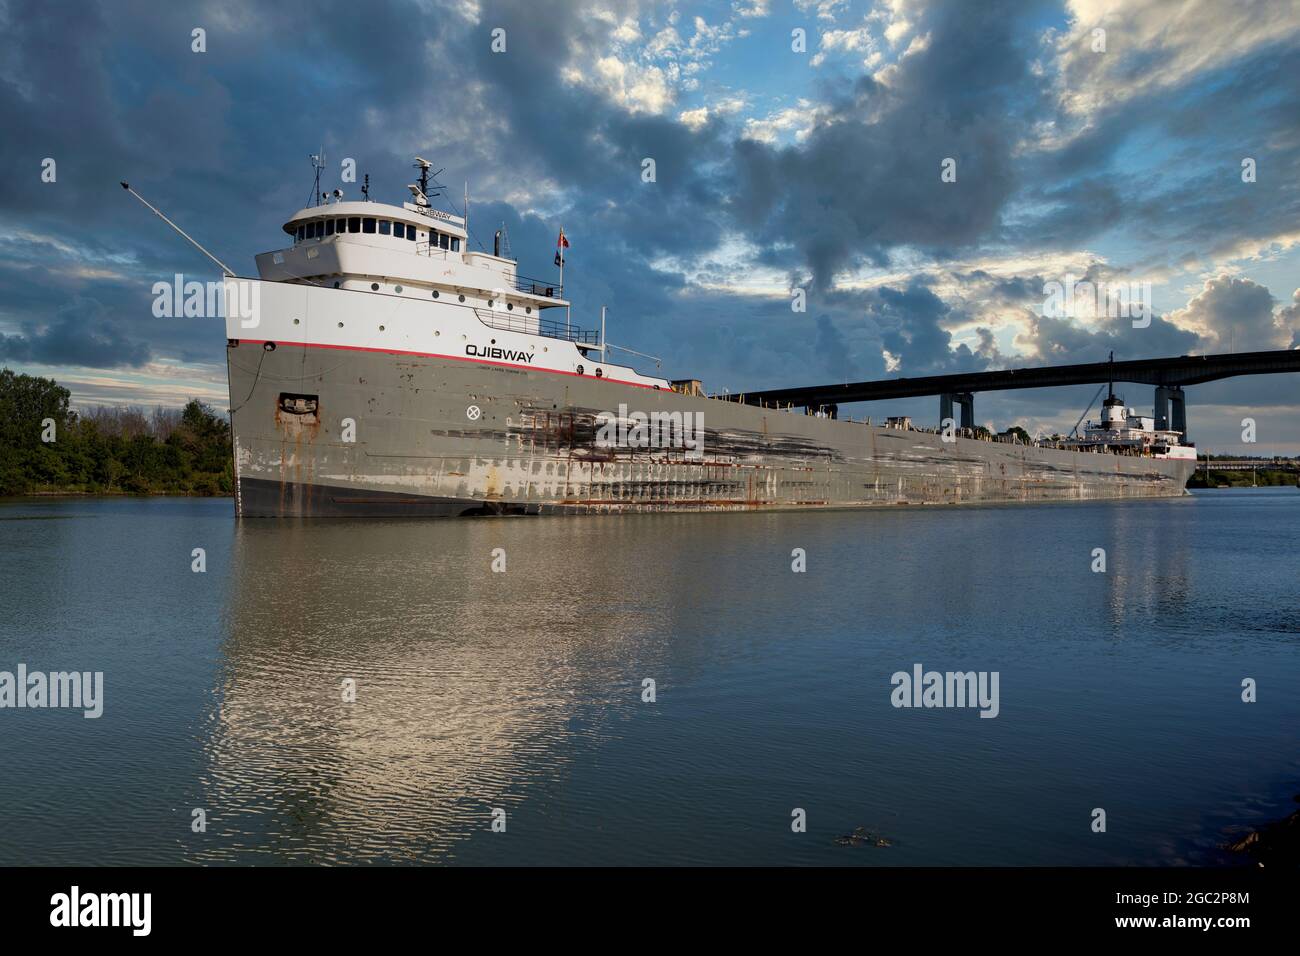 Freight ship passing under under Queen Elizabeth Way Garden City Skyway Welland Canal St. Catharines Ontario.  St. Lawrence Seaway  Great Lakes Waterw Stock Photo